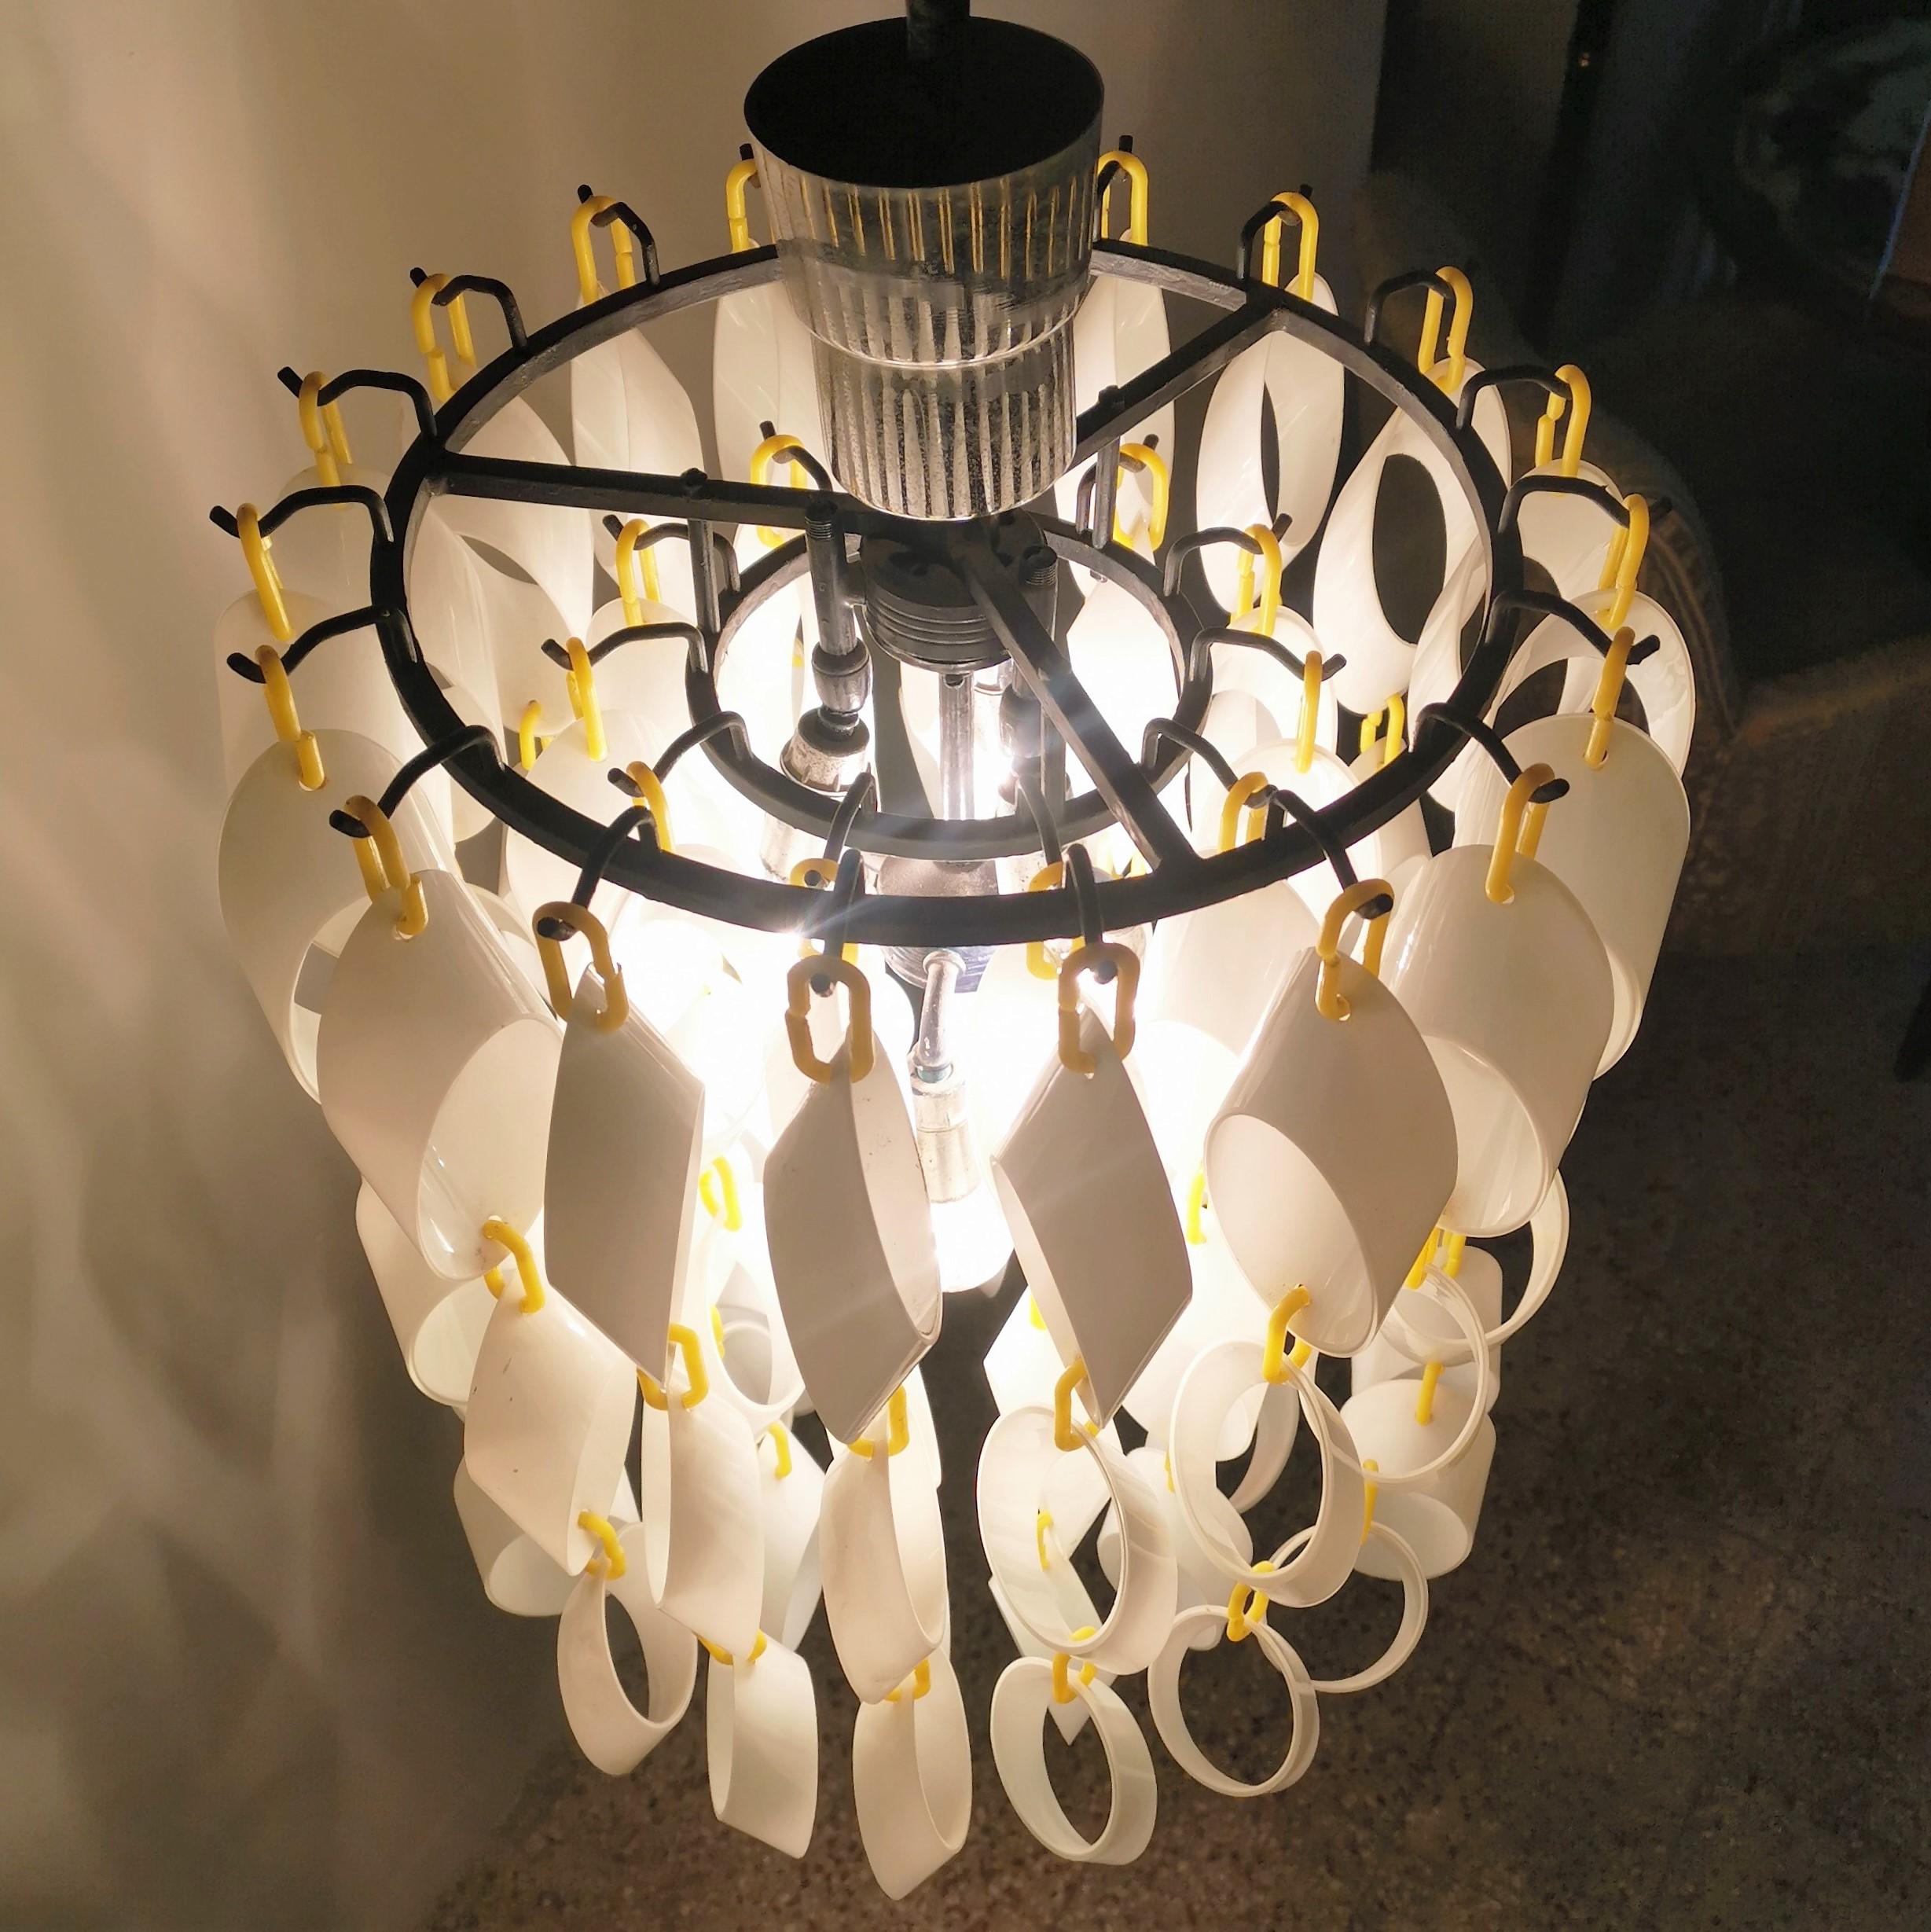 Mid-Century Vistosi Glass Chandelier Made of Modular Elements 1960s Italy In Good Condition For Sale In Palermo, IT